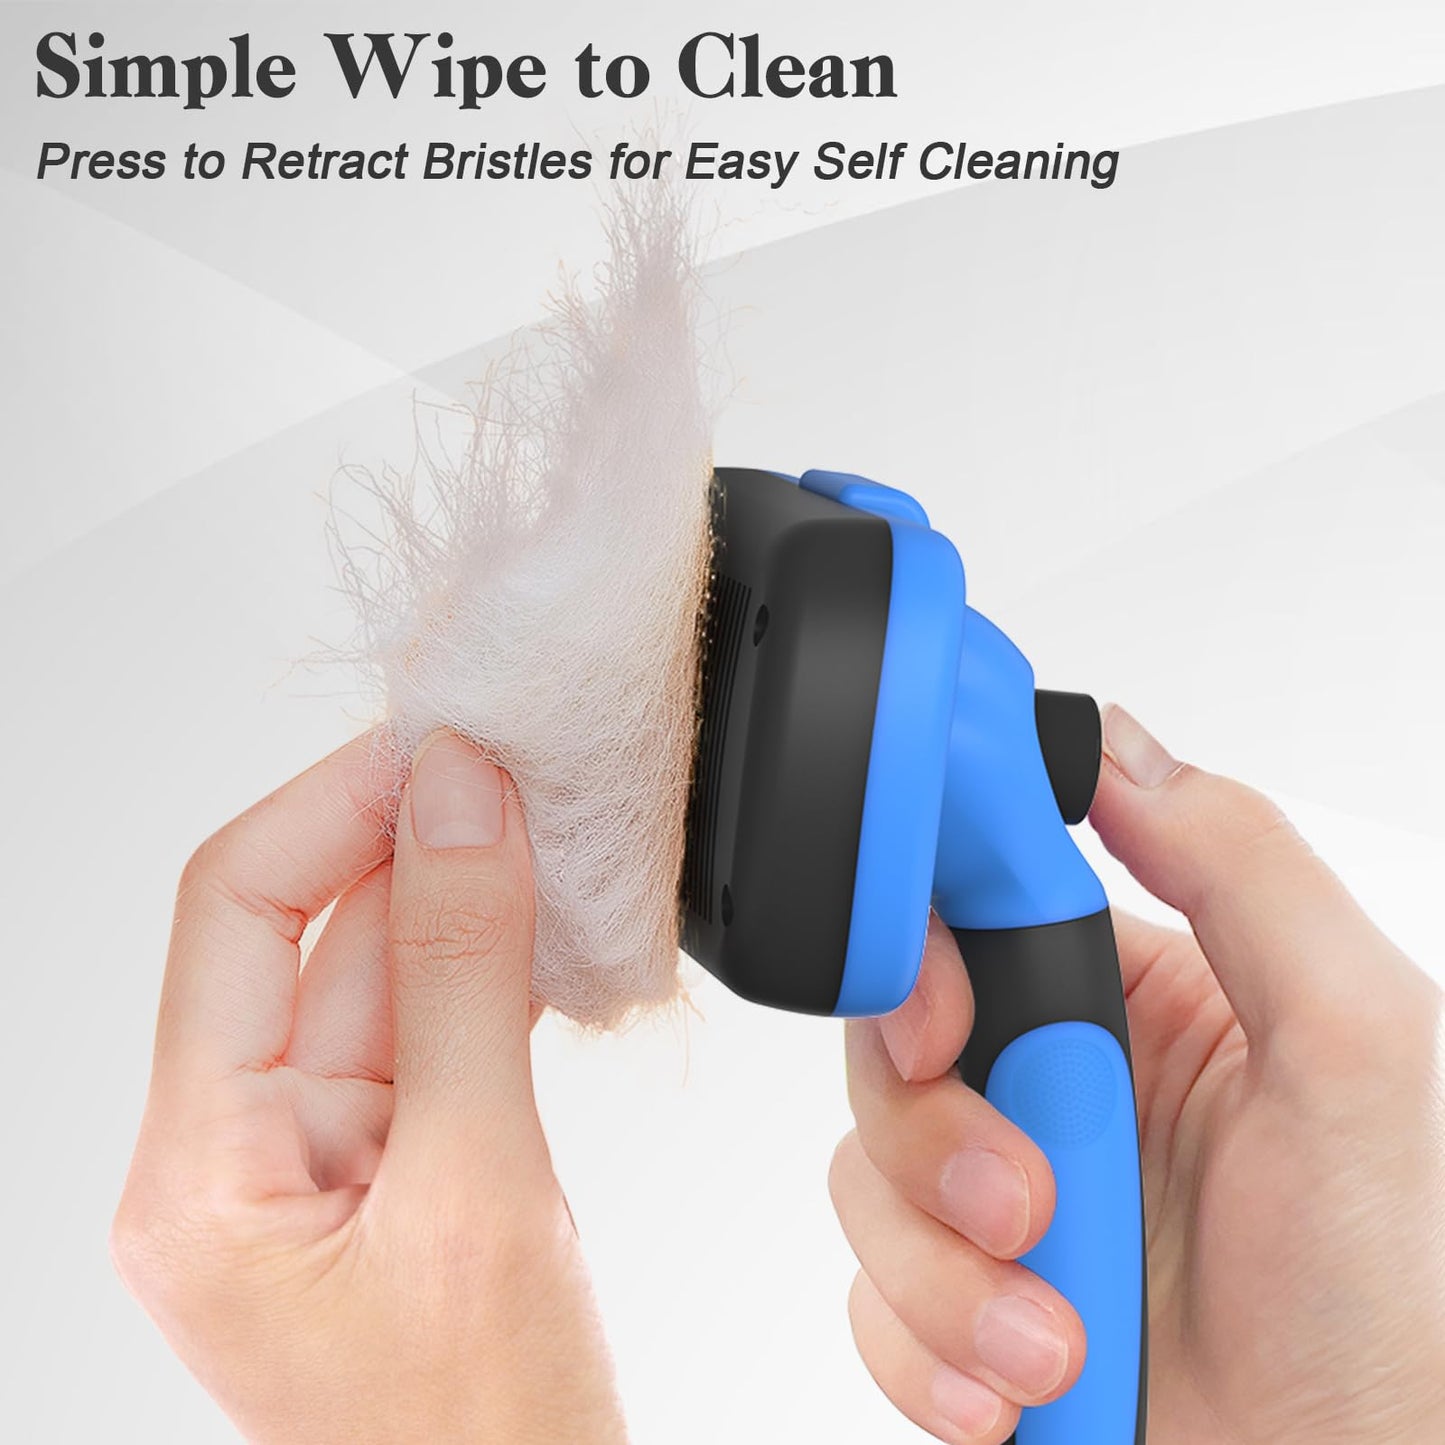 Swihauk Self Cleaning Slicker Brush for Dogs & Cats, Skin Friendly Grooming Cat Brush, Dog Brush for Shedding, Deshedding Brush, Hair Brush Puppy Brush for Haired Dogs, Pet Supplies Accessories, Blue